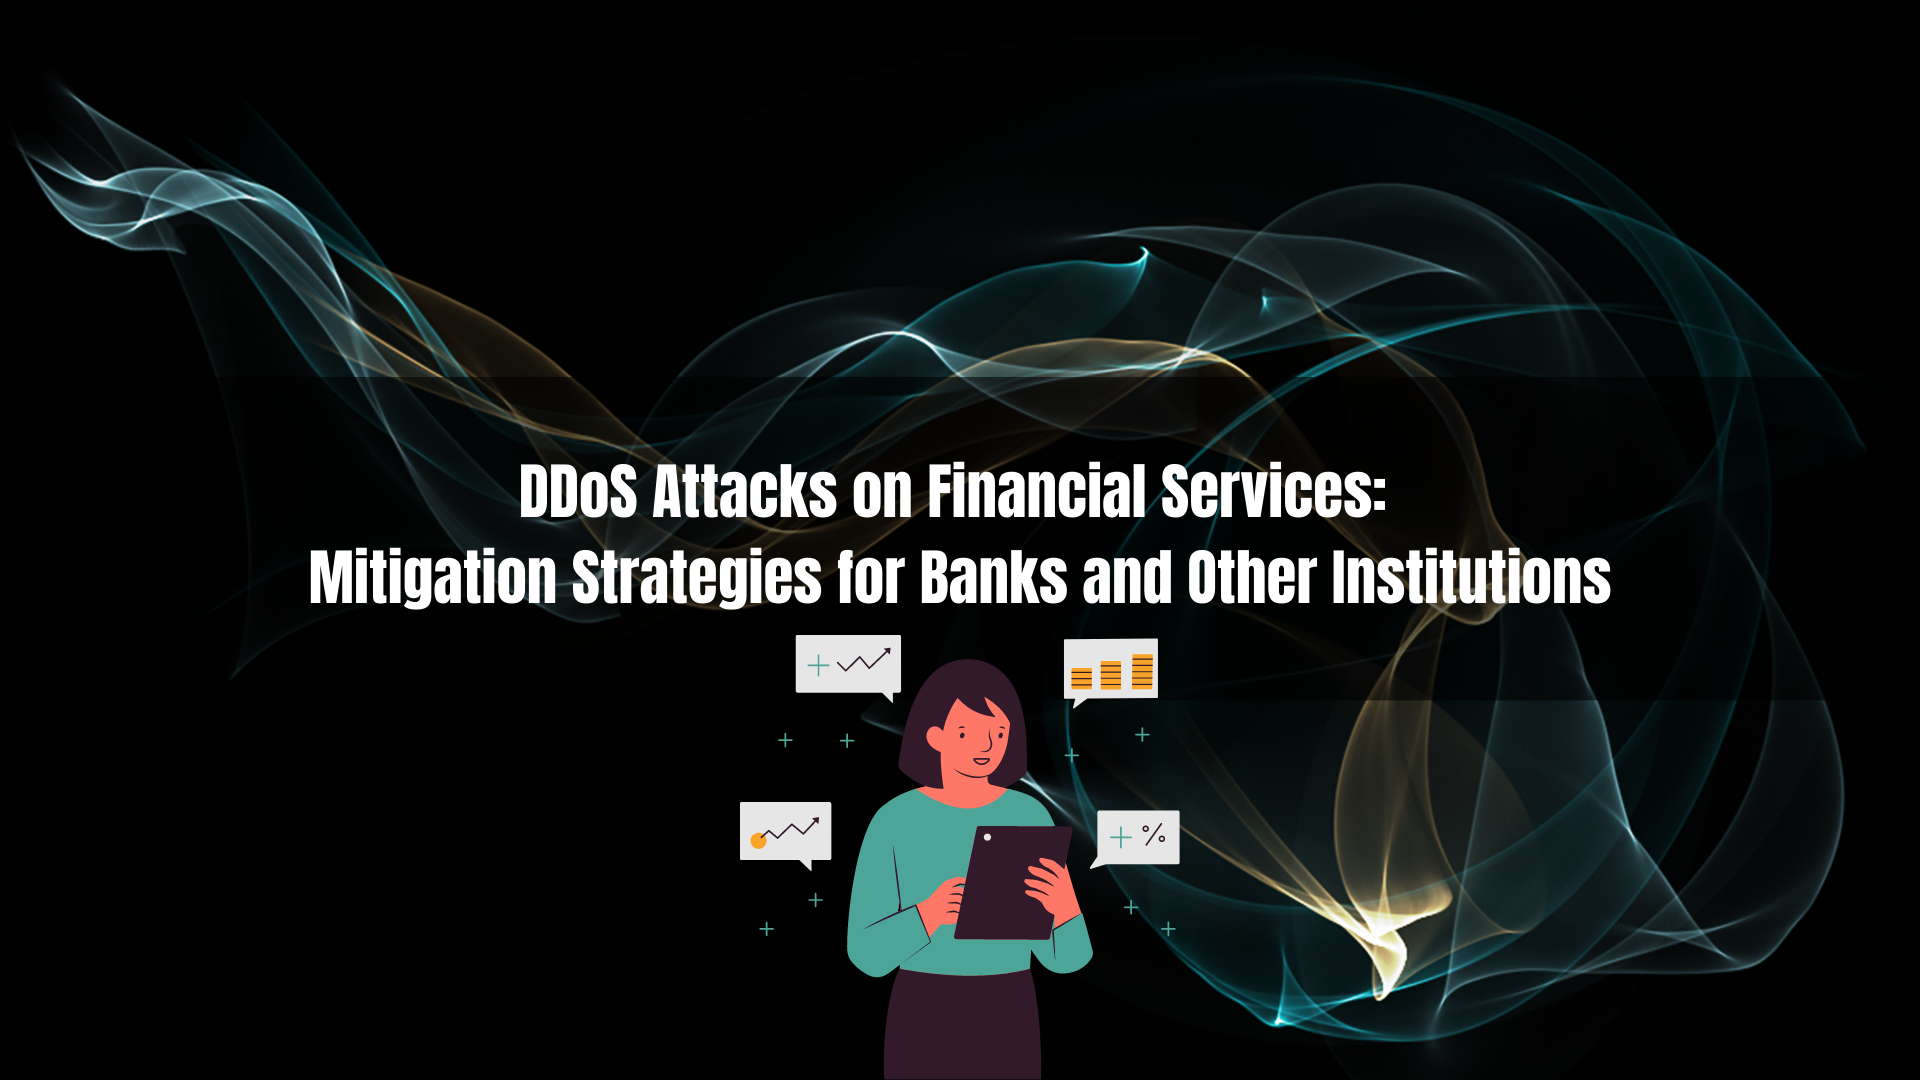 DDoS Attacks on Financial Services Mitigation Strategies for Banks and Other Institutions